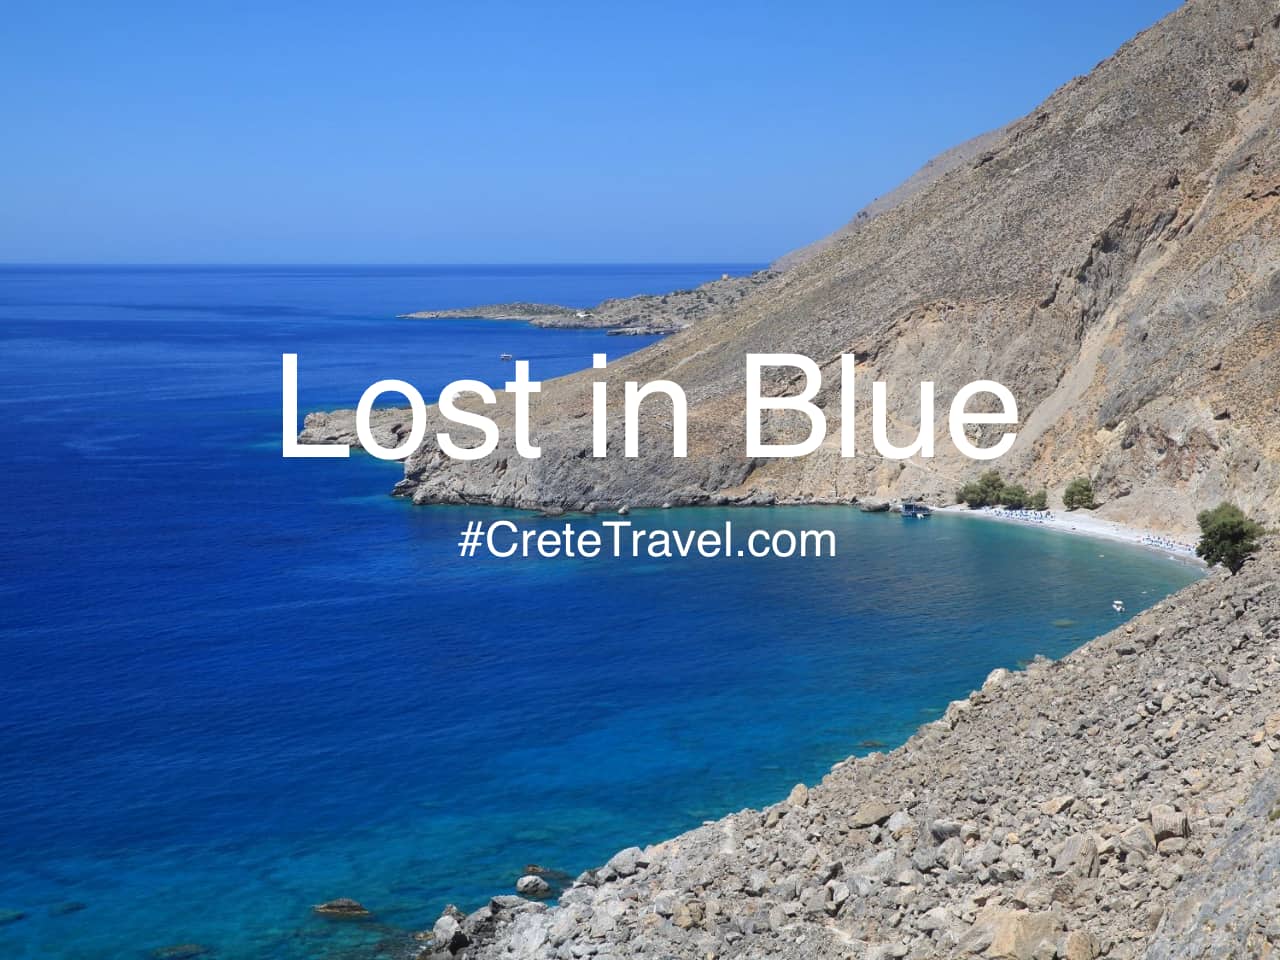 I want to live ... I want to travel to Crete